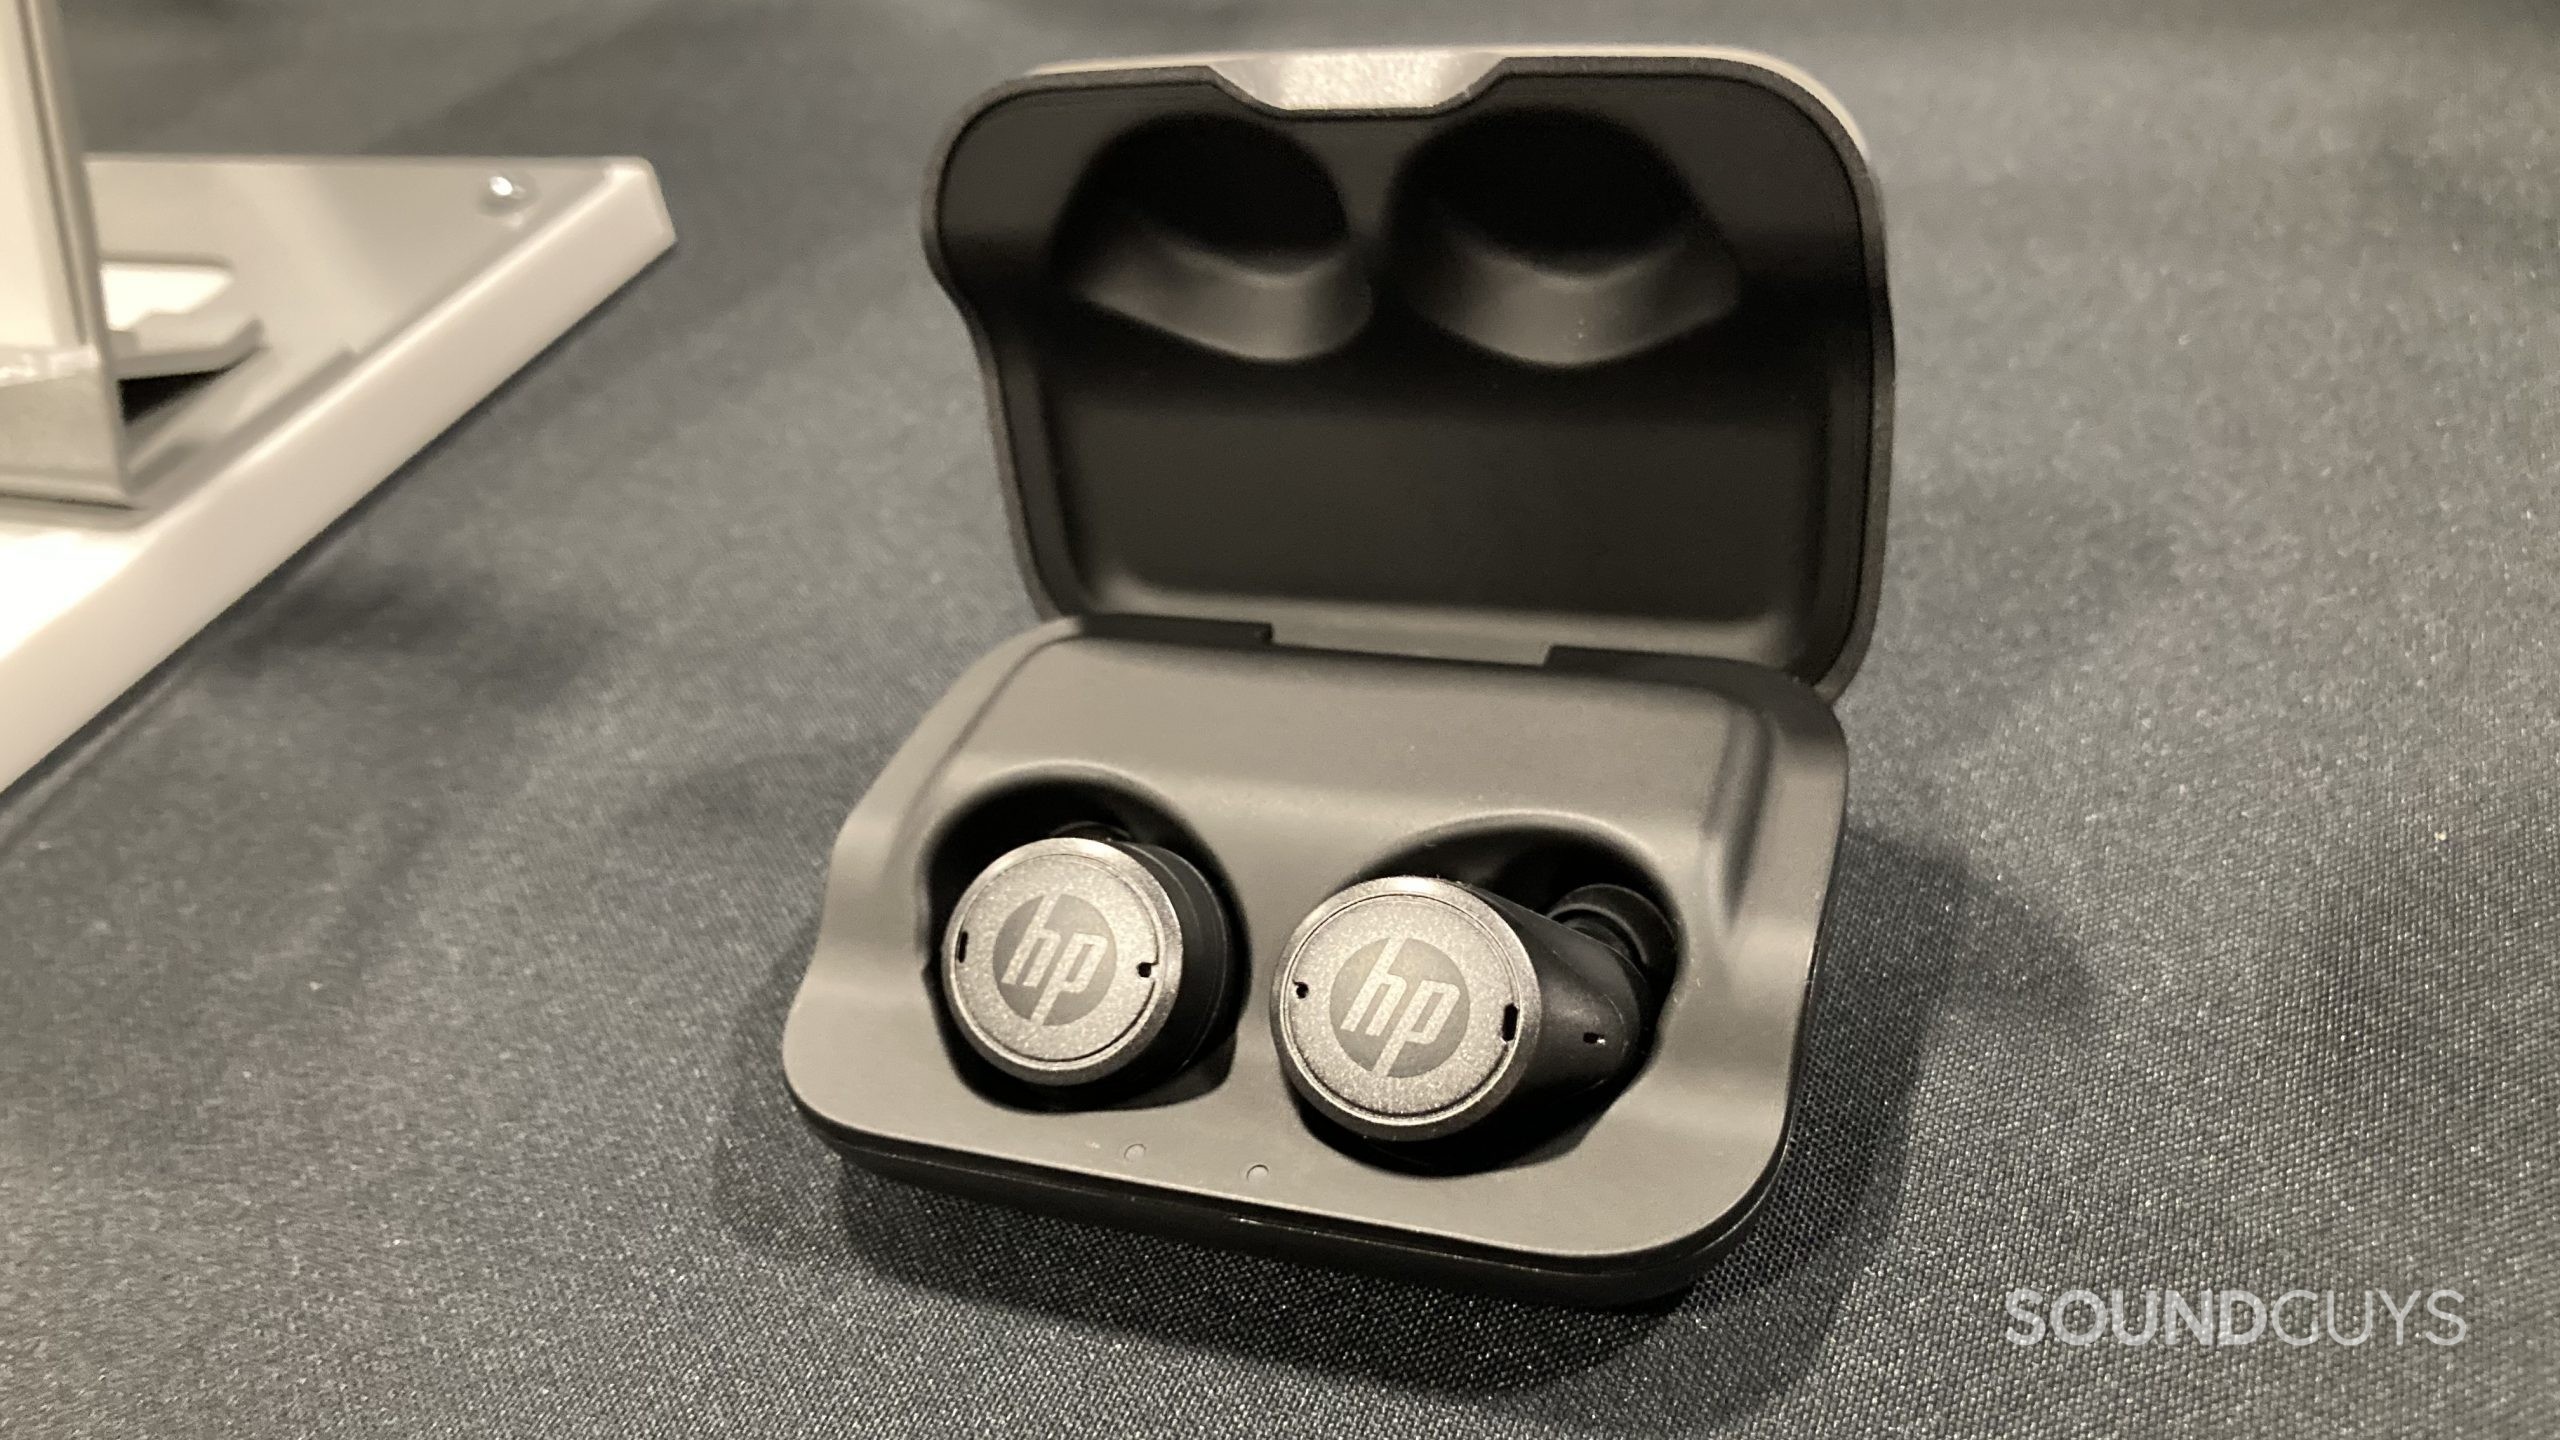 HP Hearing PRO earbuds in charging case.